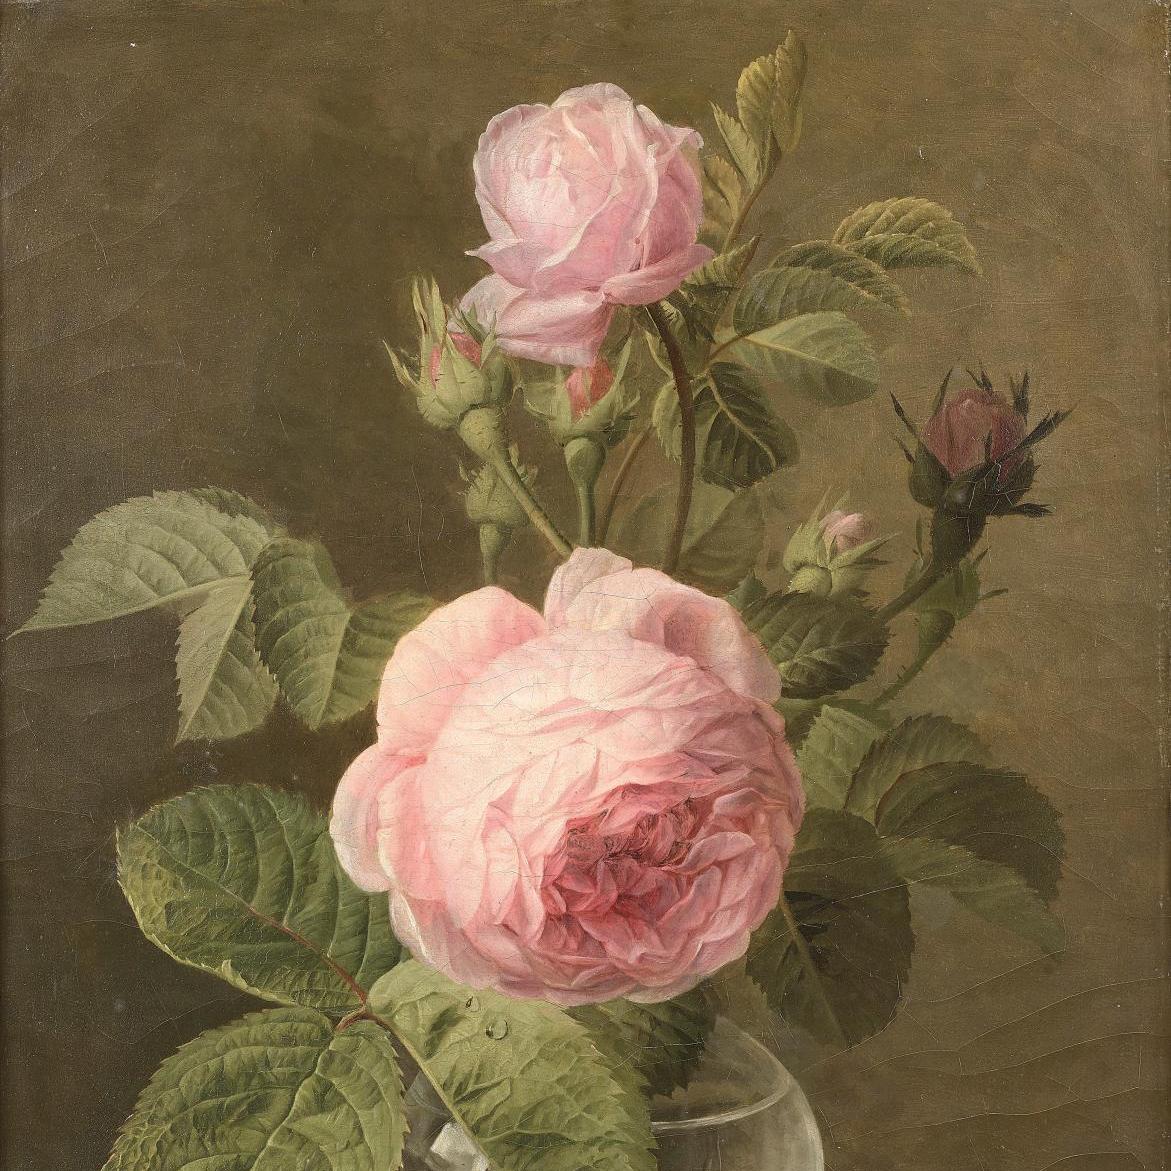 A Larger-than-life Bouquet of Roses by Frans van Dael - Pre-sale